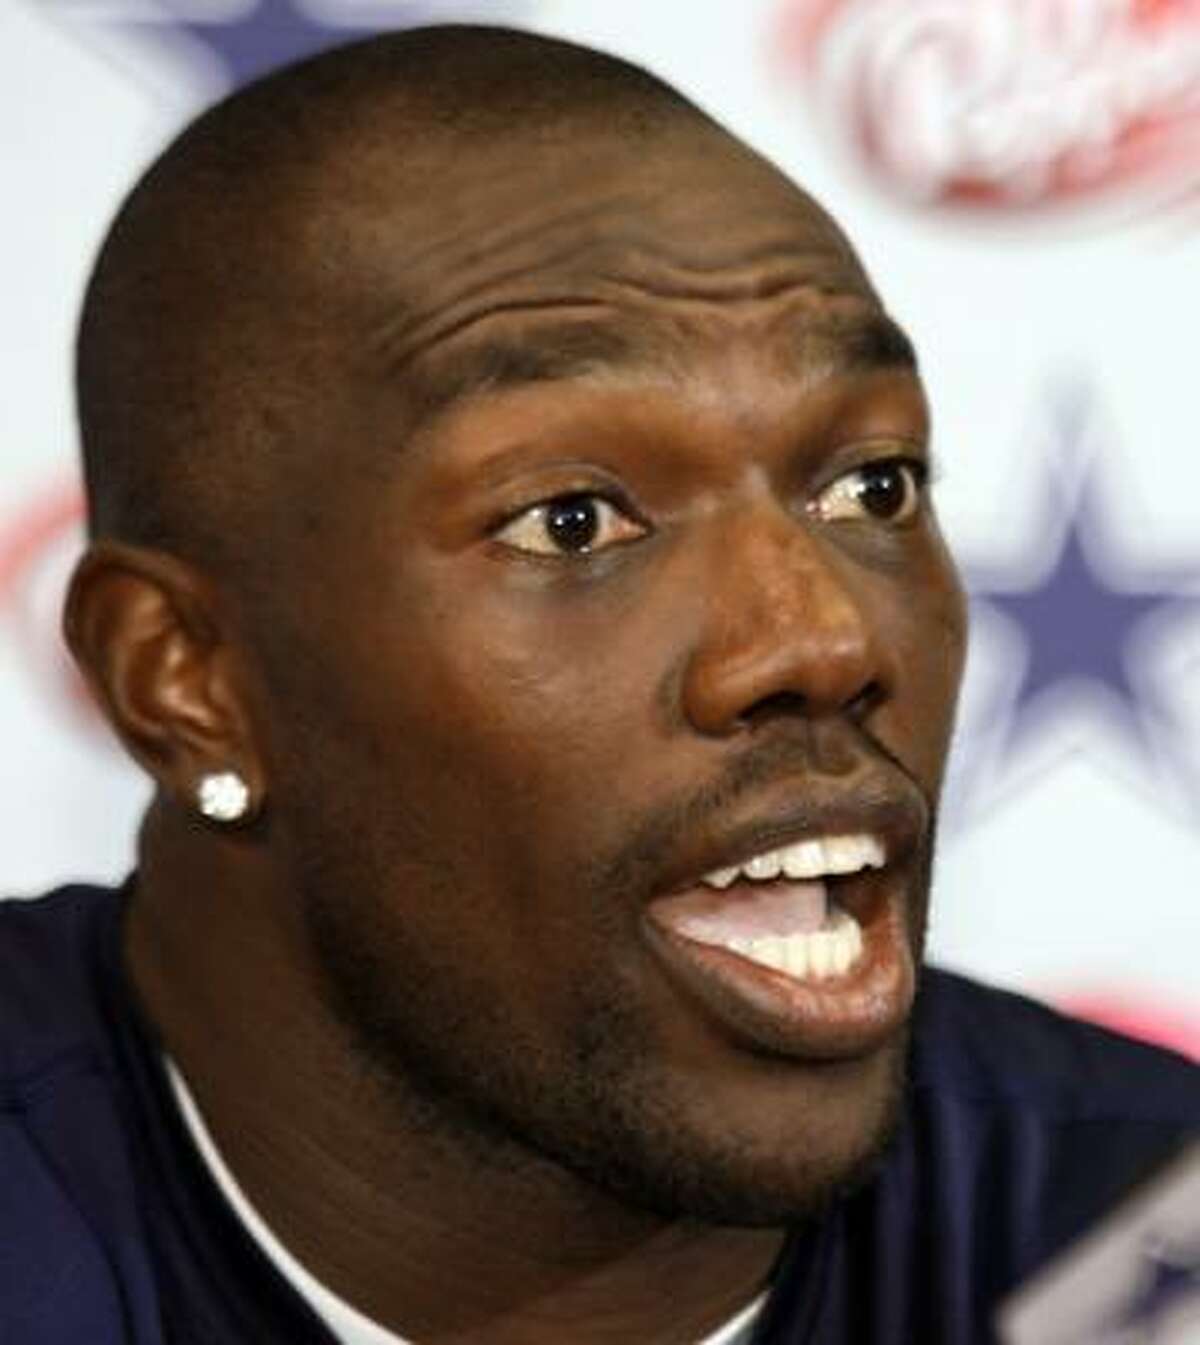 Dallas Cowboys football star Terrell Owens answers questions during a news conference at the teams' headquarters in Valley Ranch.